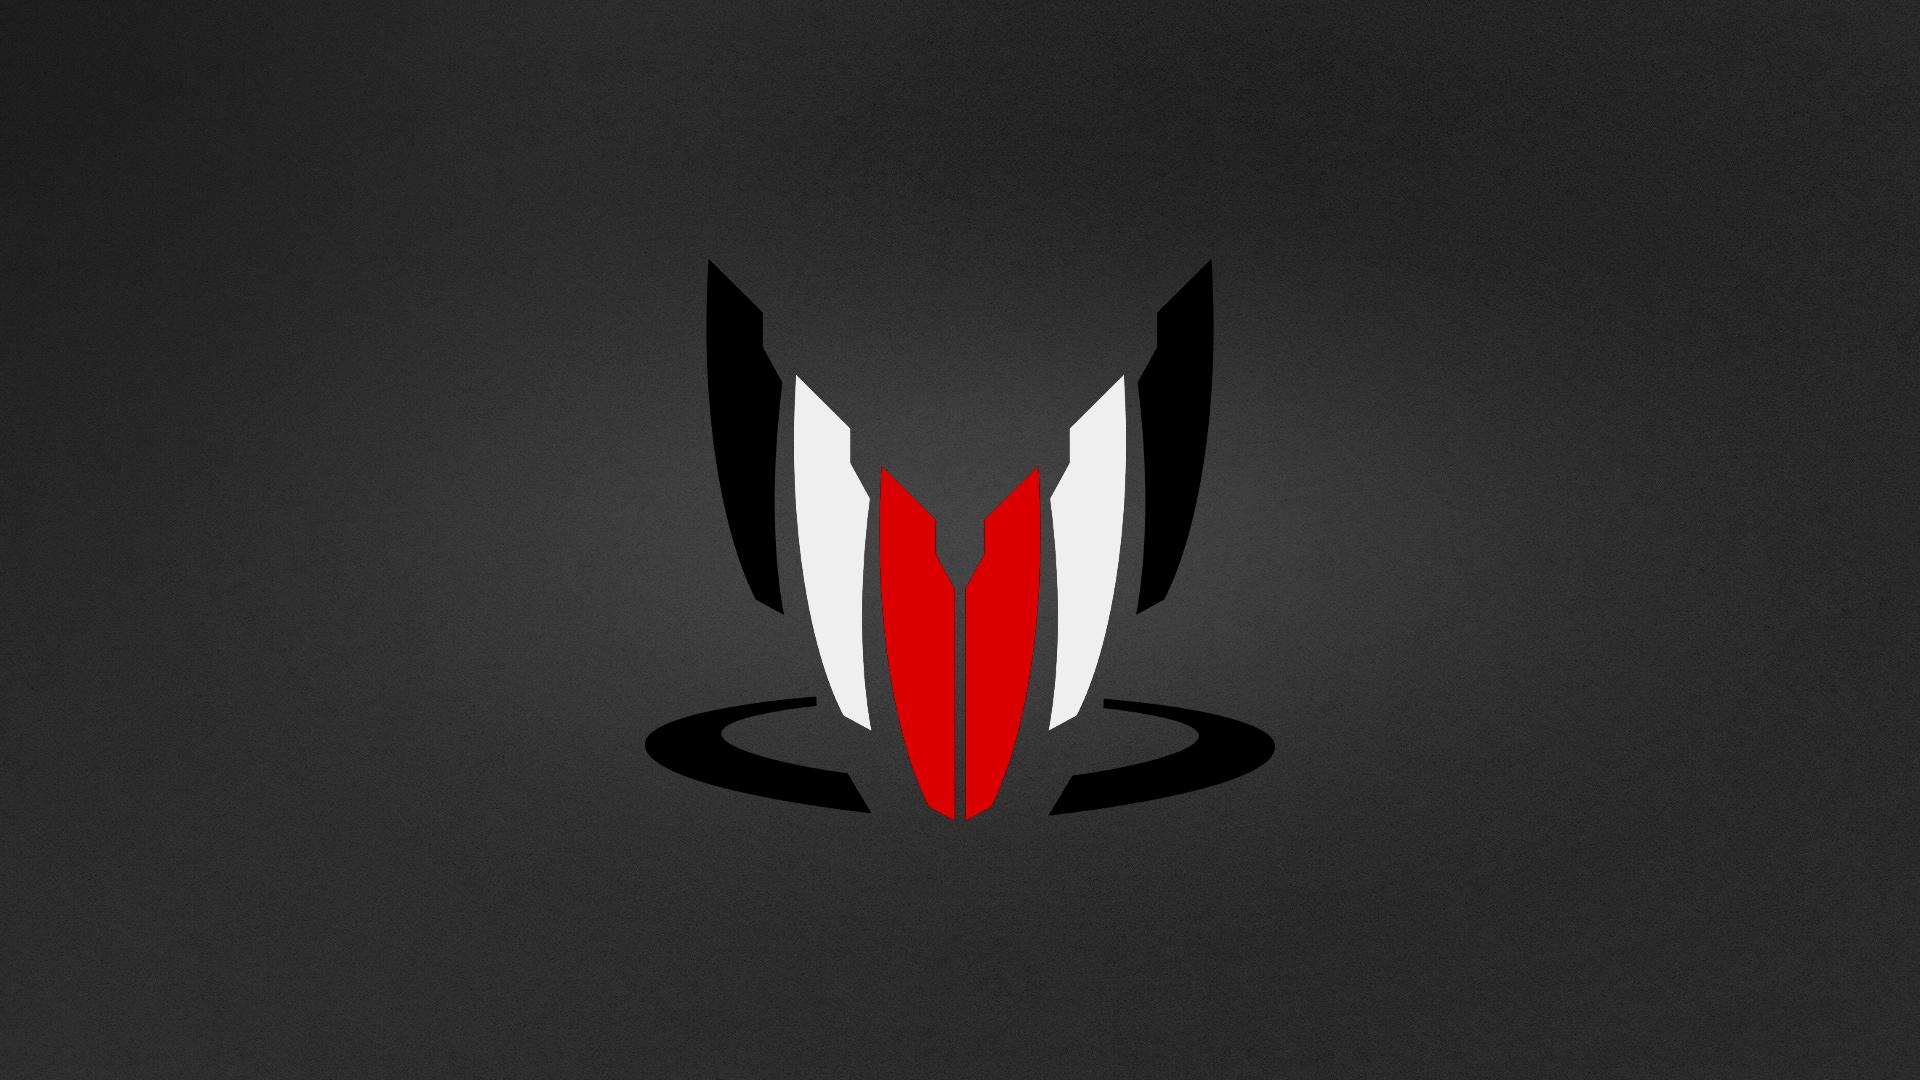 My brother made me a kickass wallpaper. Spectre logo with N7 ...